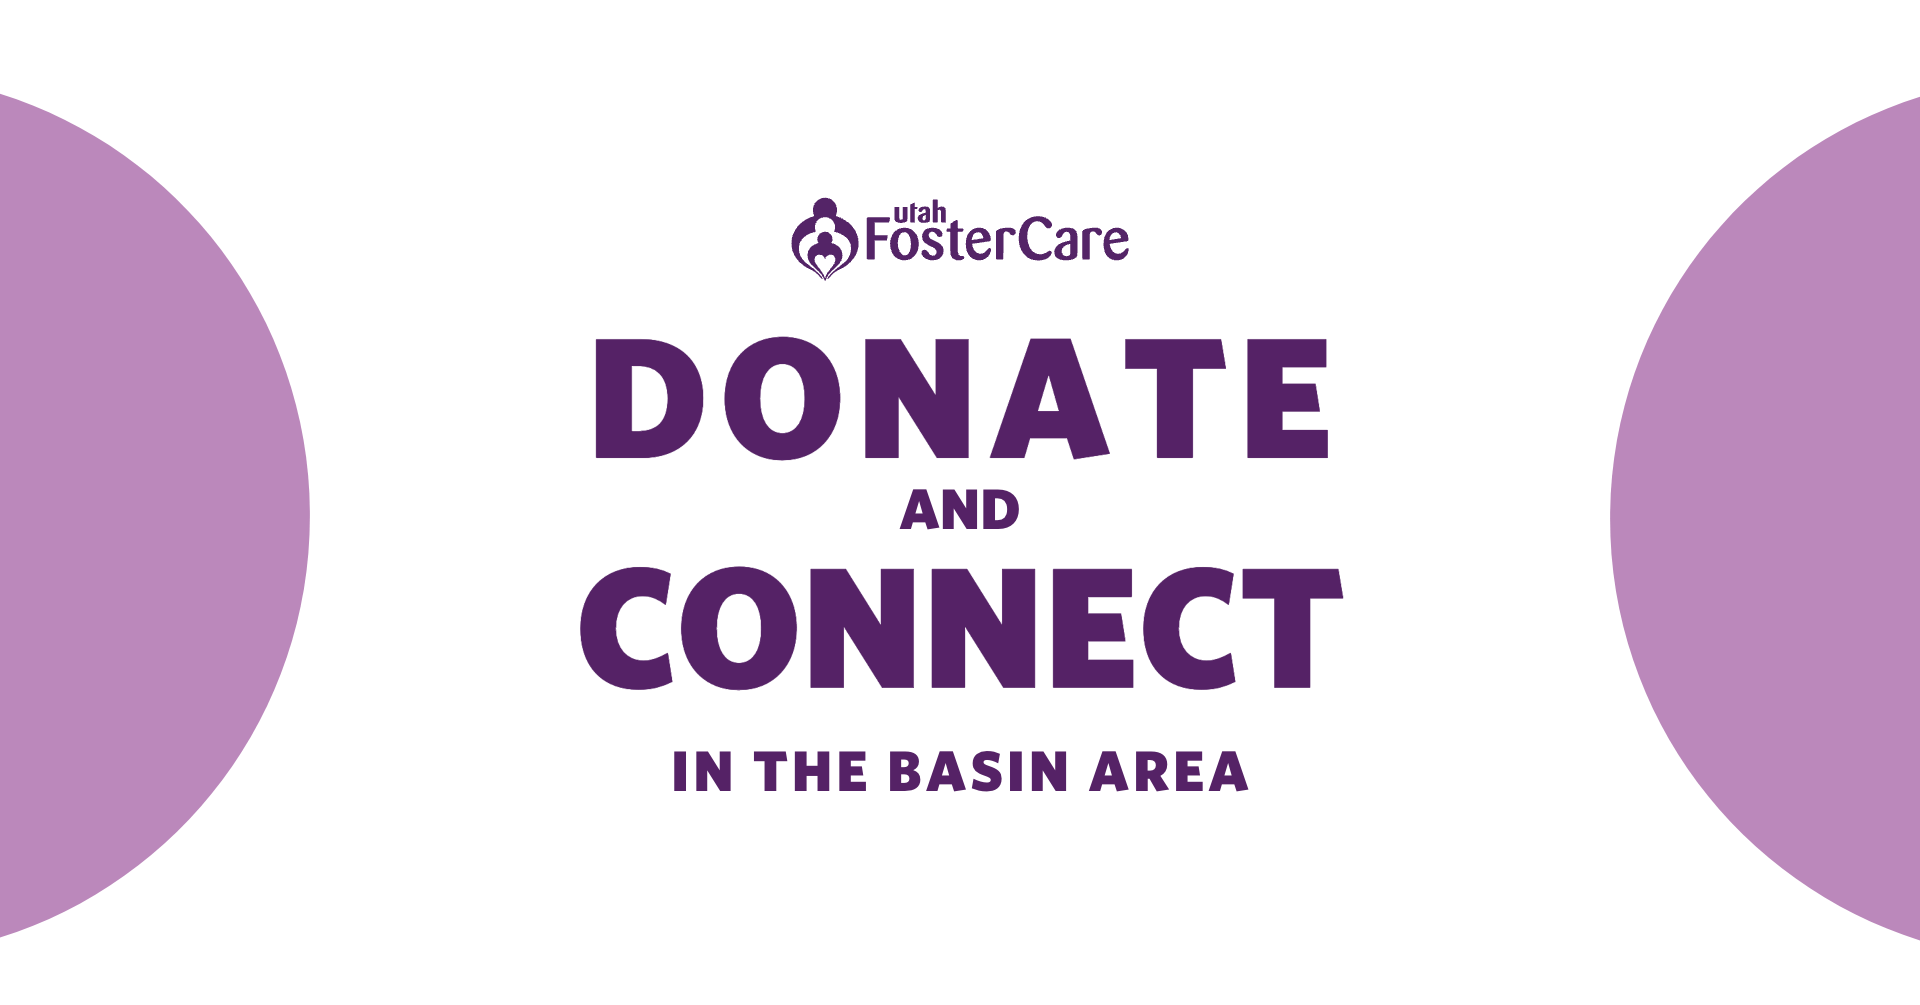 Donate and Connect in the Basin - Utah Foster Care